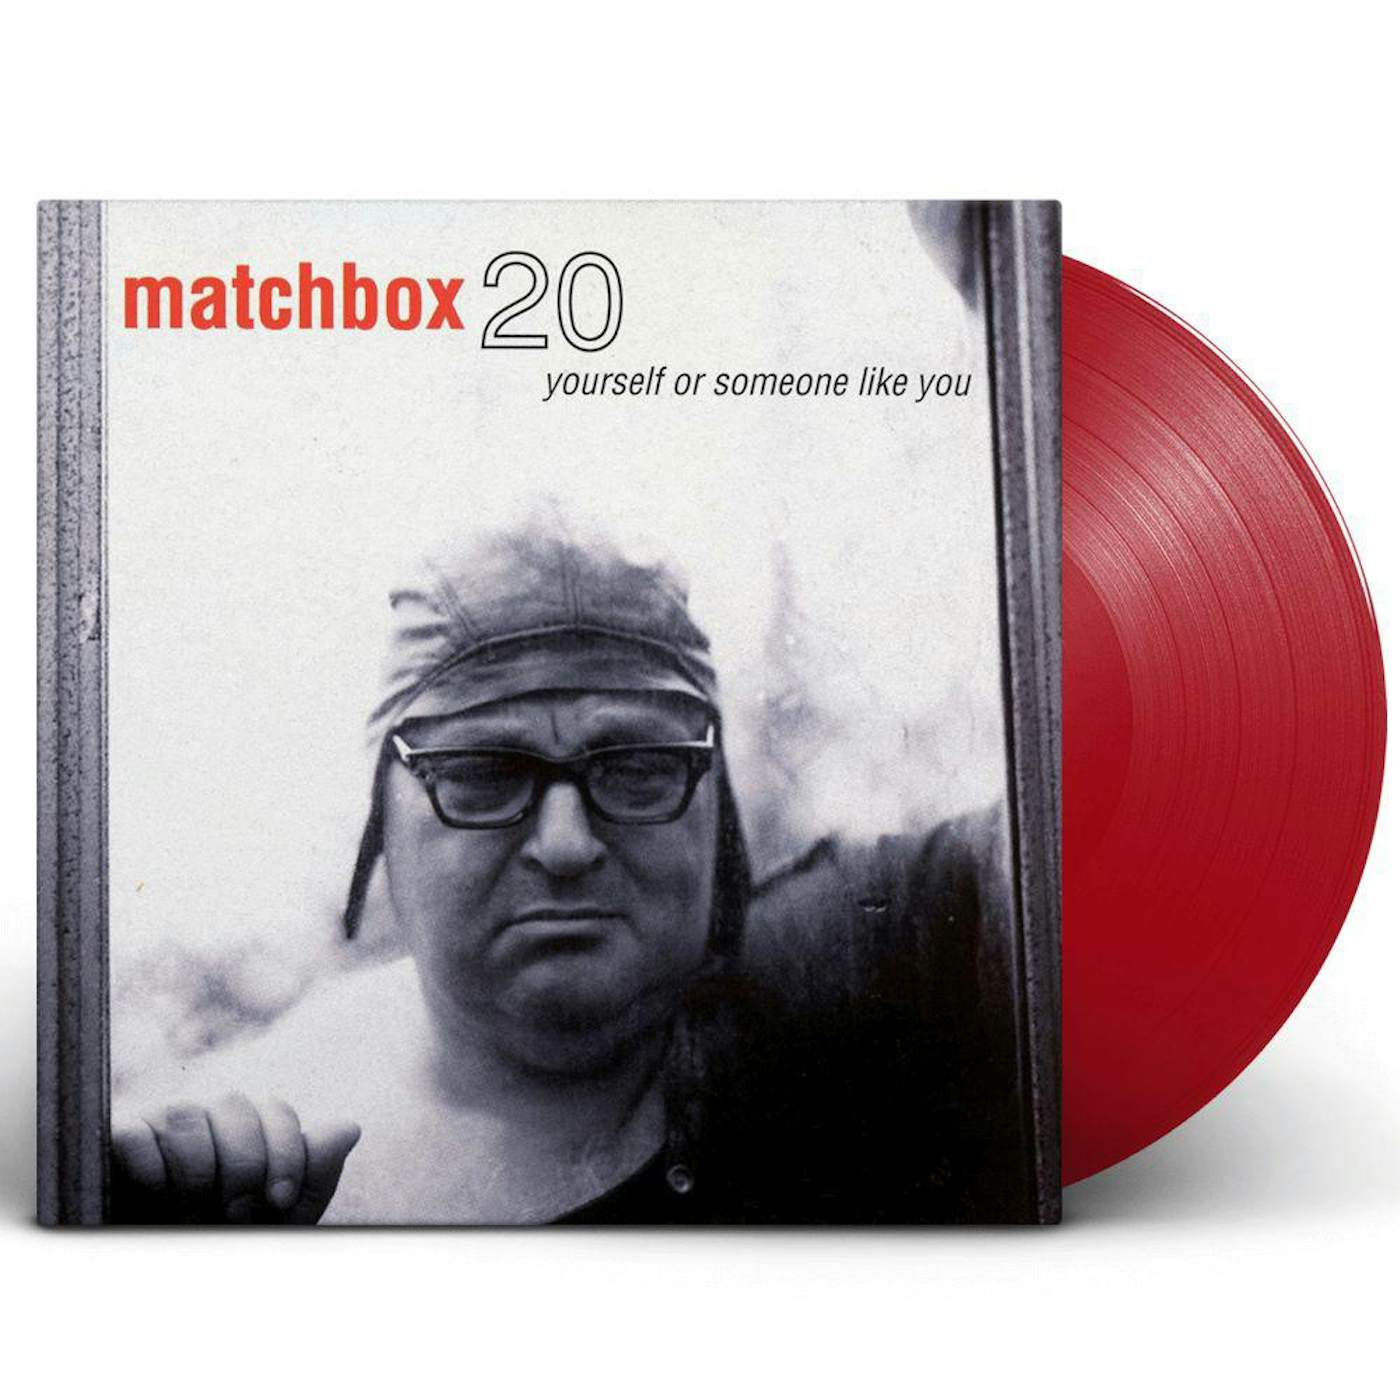 Matchbox 20 Yourself Or Someone Like You (Limited Edition / Transparent Red) Vinyl Record